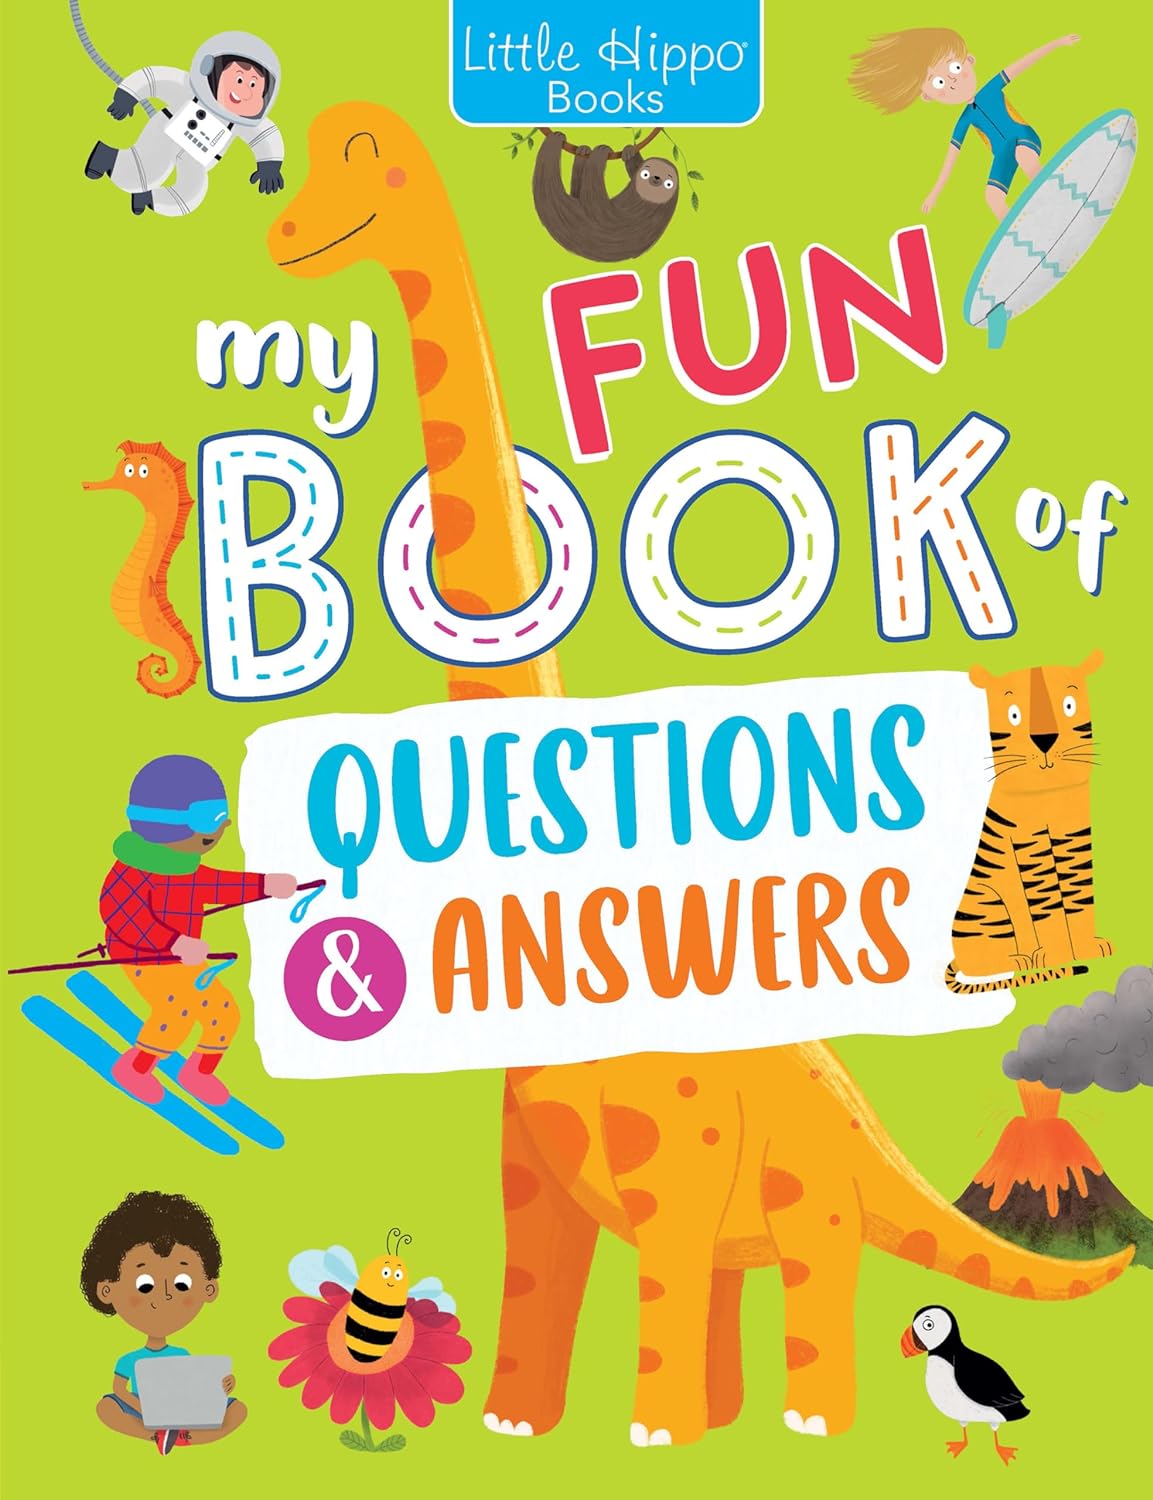 little hippo books fun questions and answers education and learning